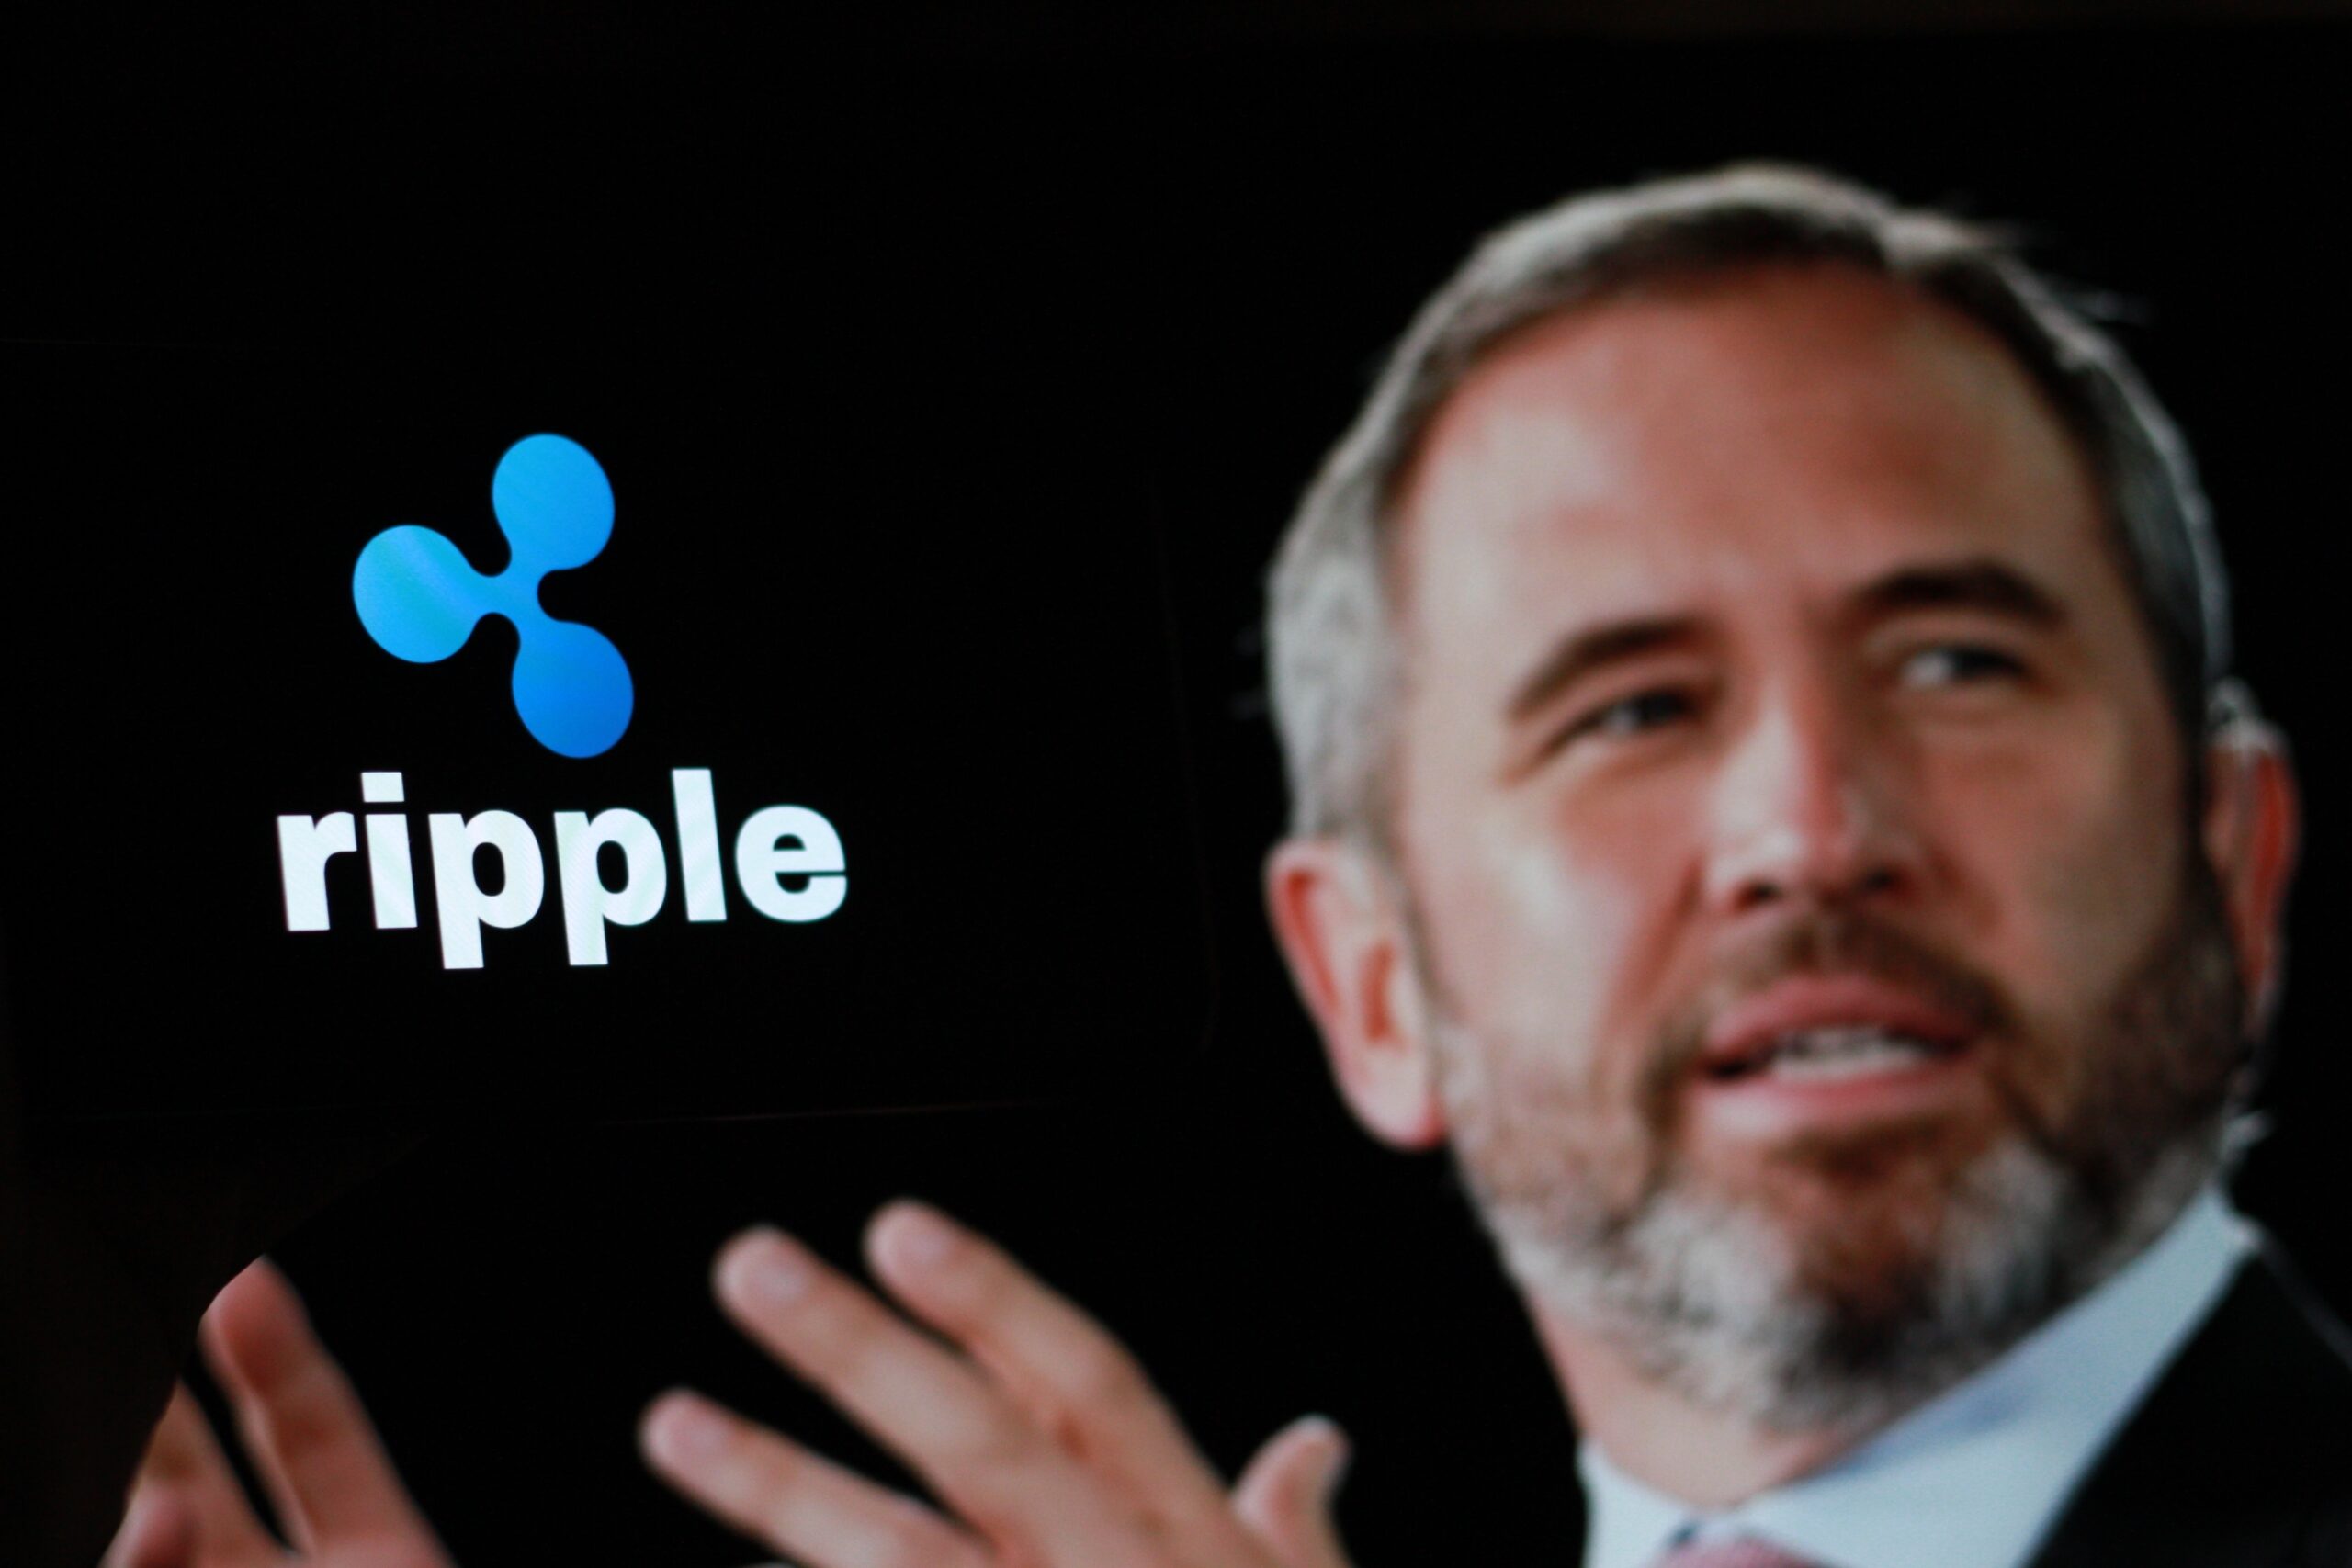 Mixed Reactions Among XRP Community to Ripple CEO's Cryptic Post